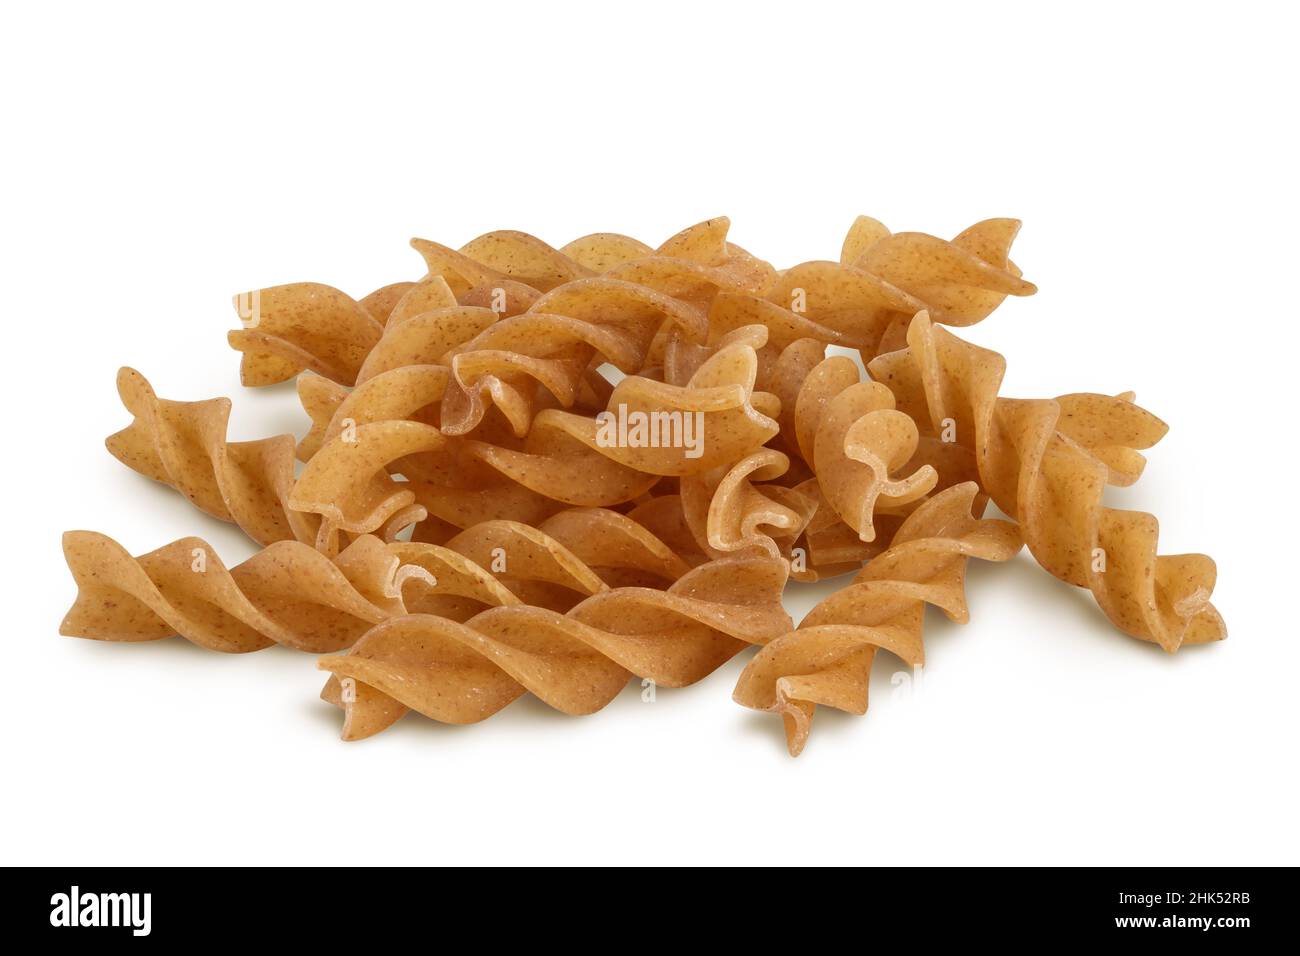 Wolegrain fusilli pasta from durum wheat isolated on white background with clipping path and full depth of field. Stock Photo